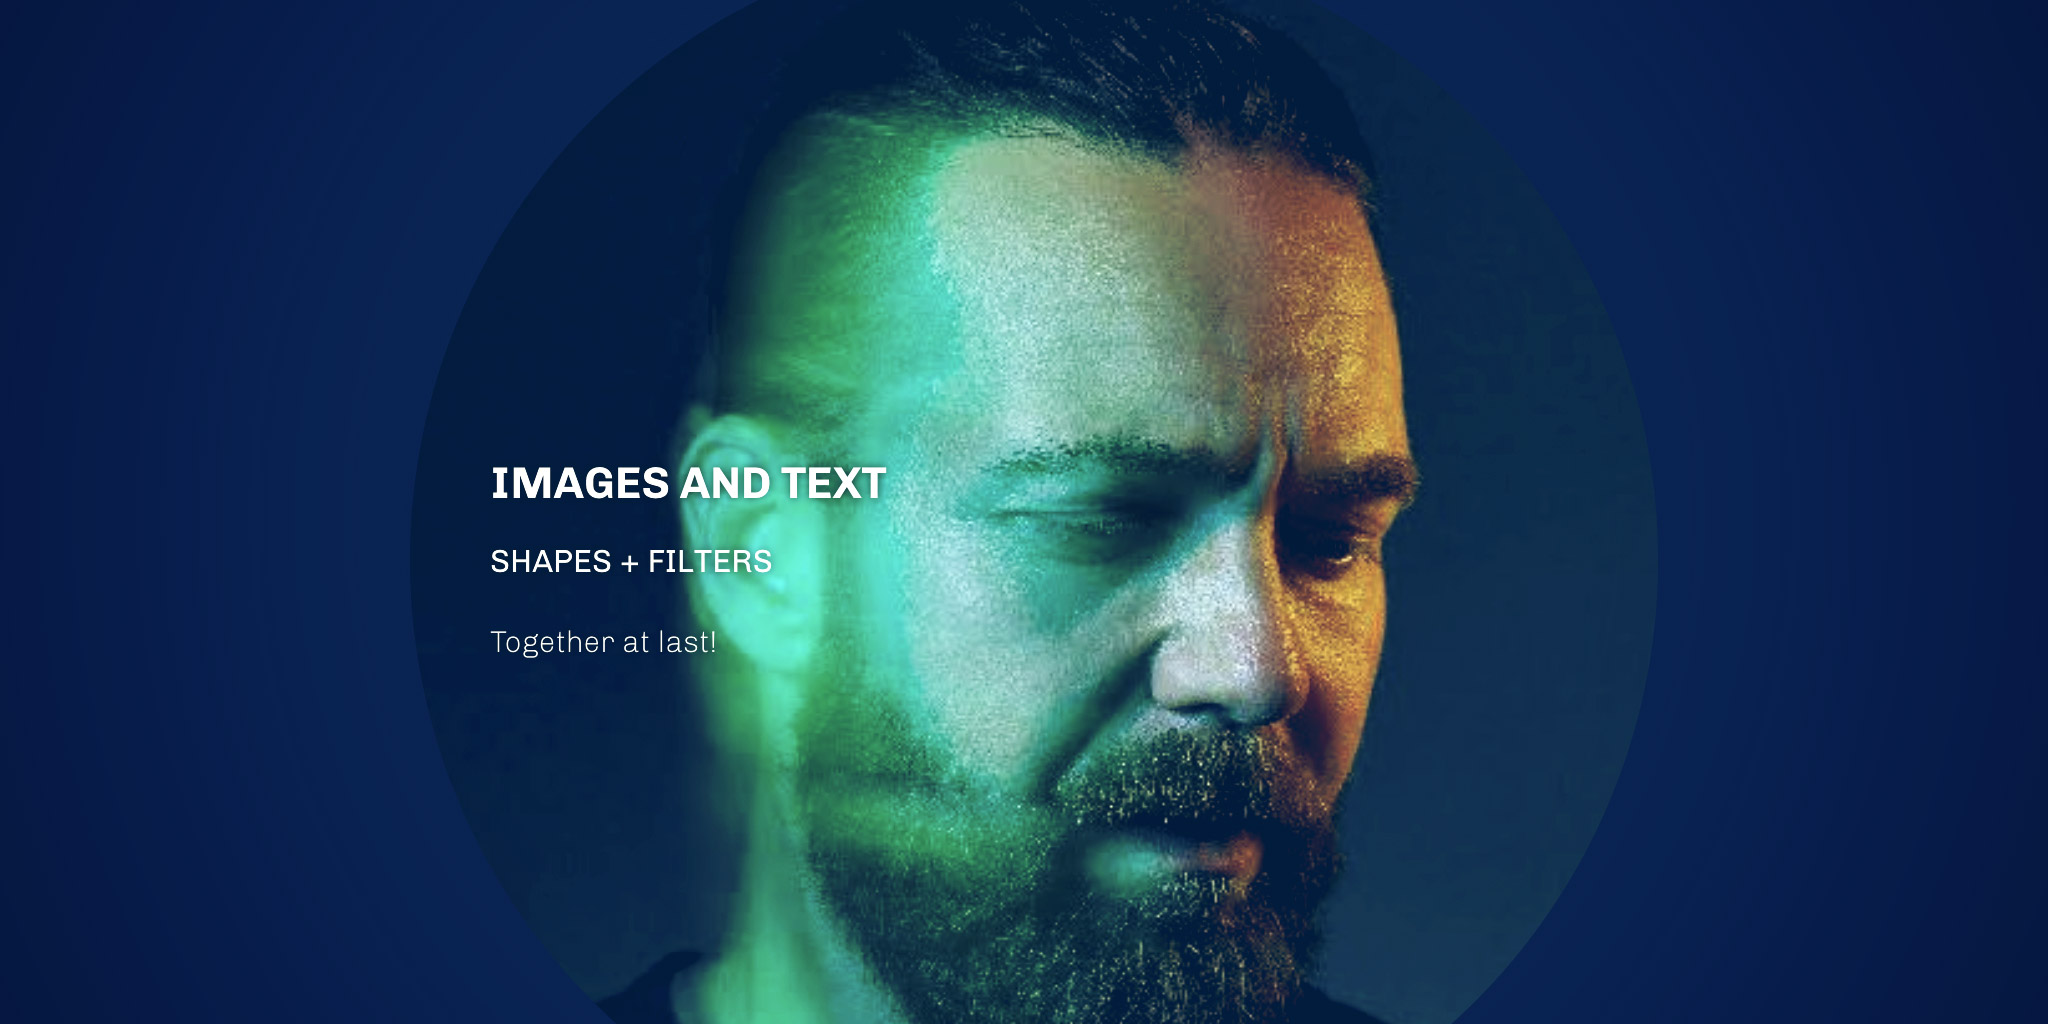 New Feature: Image and text